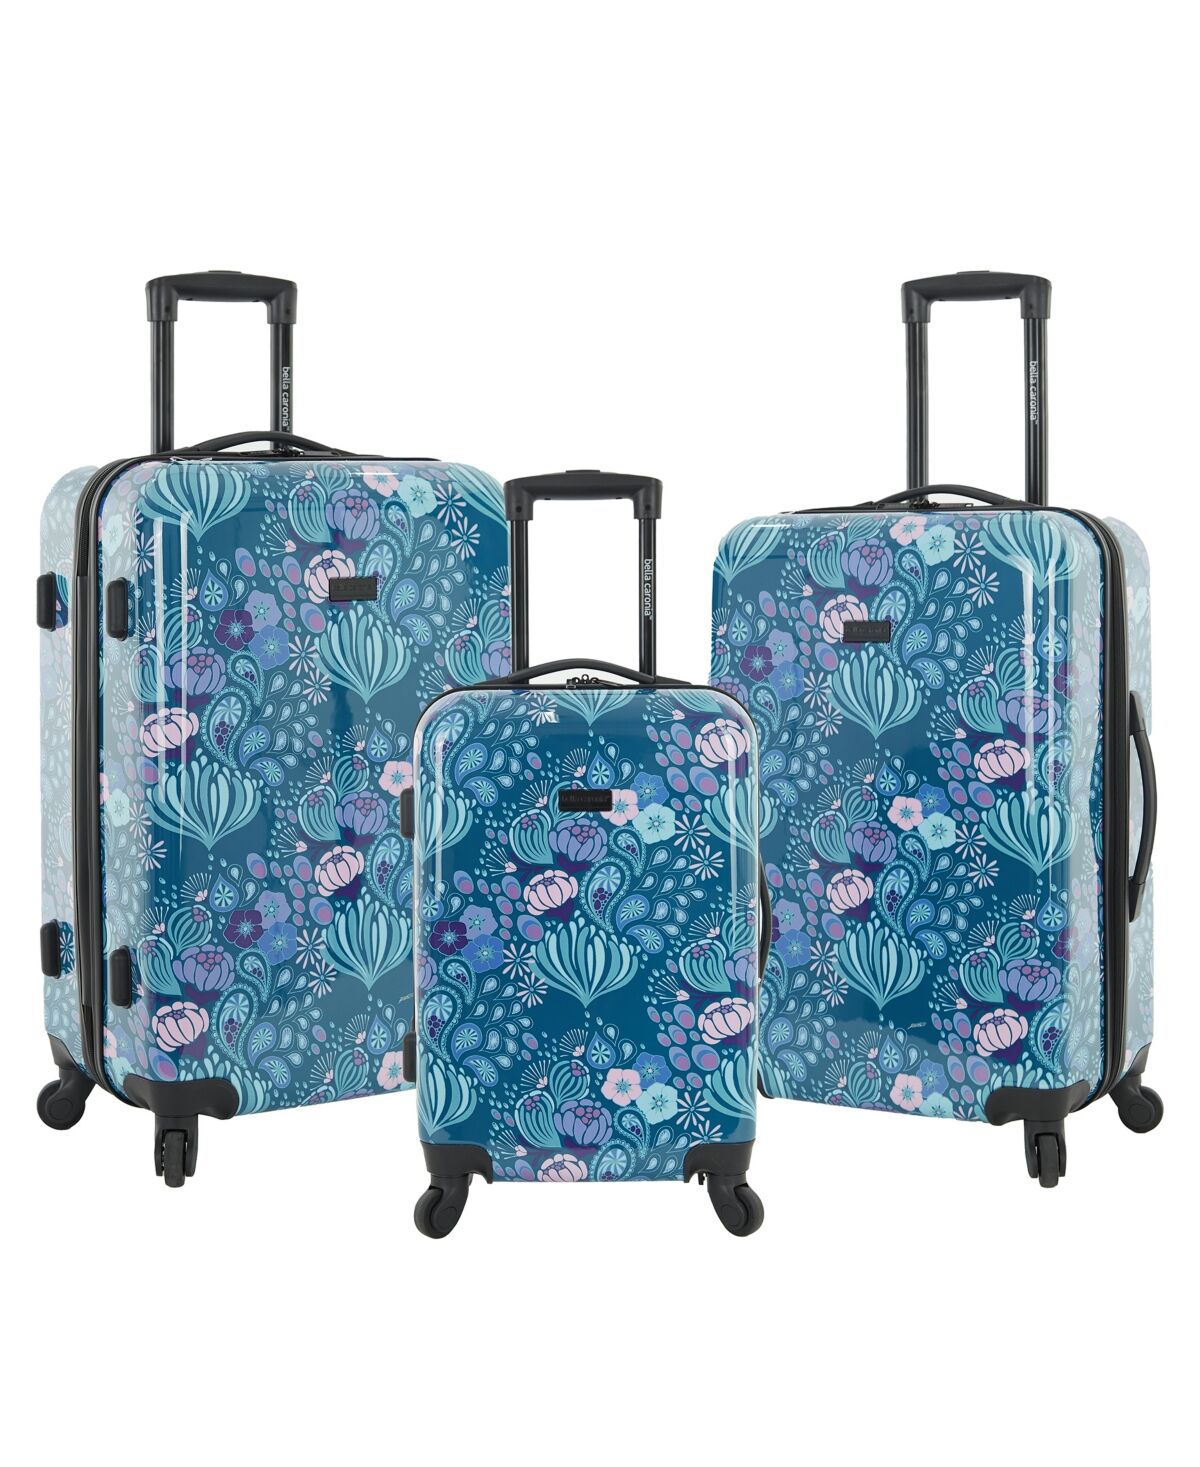 Bella Caronia 3 Piece Rolling Hardside Luggage Set with 4 Wheel Spinners - Desert